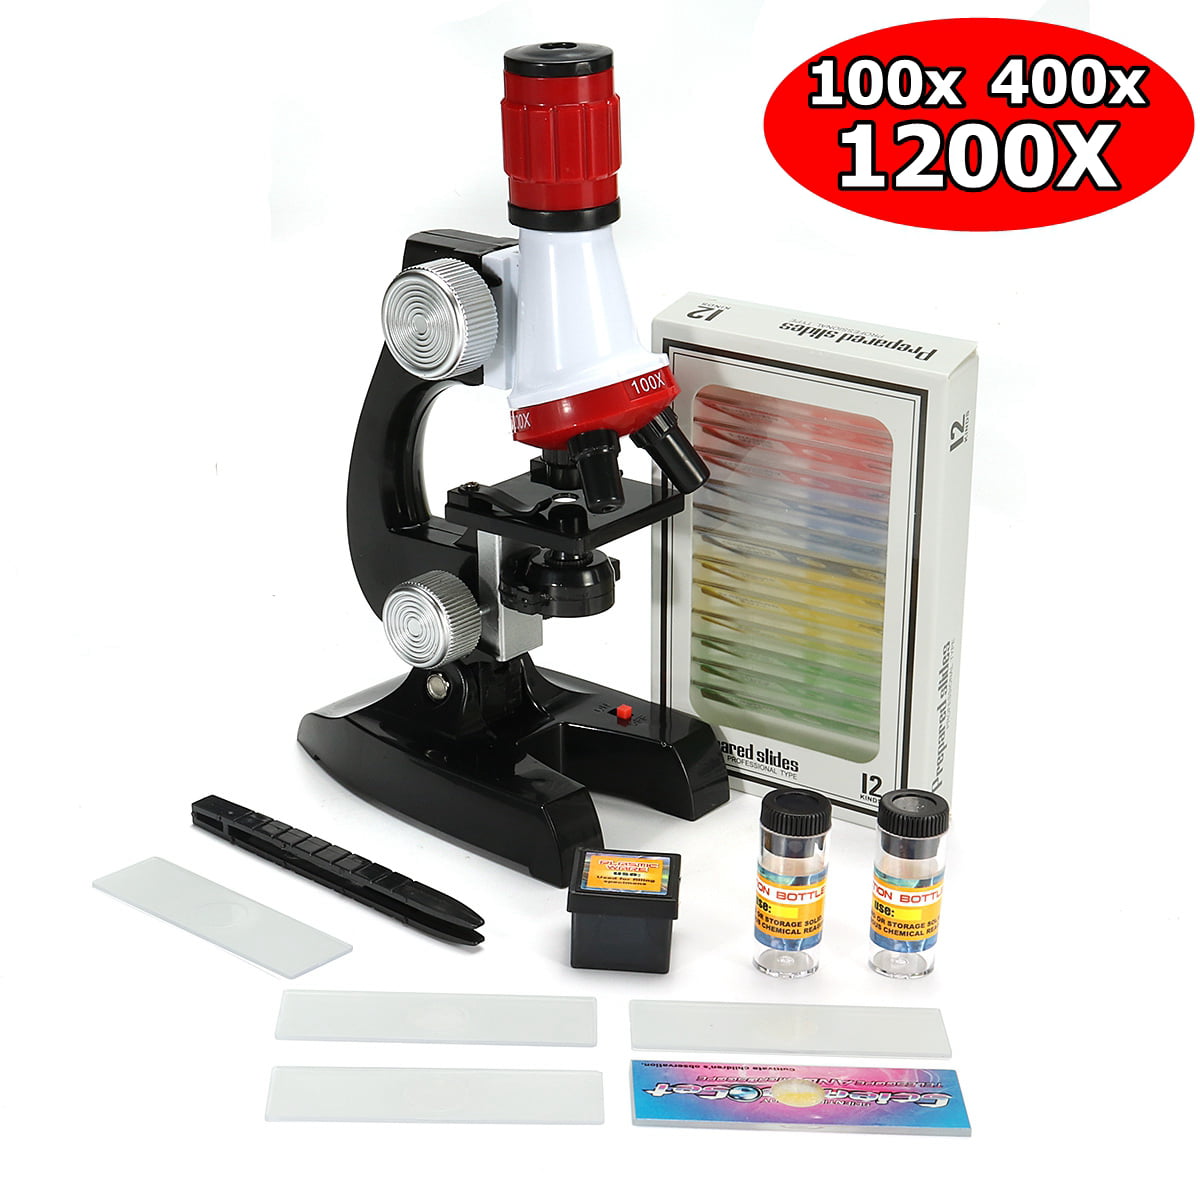 Ocamo Science Kits for Kids Beginner Microscope with LED 100X 400X and 1200X Magnification Kids Educational Toy Birthday Present